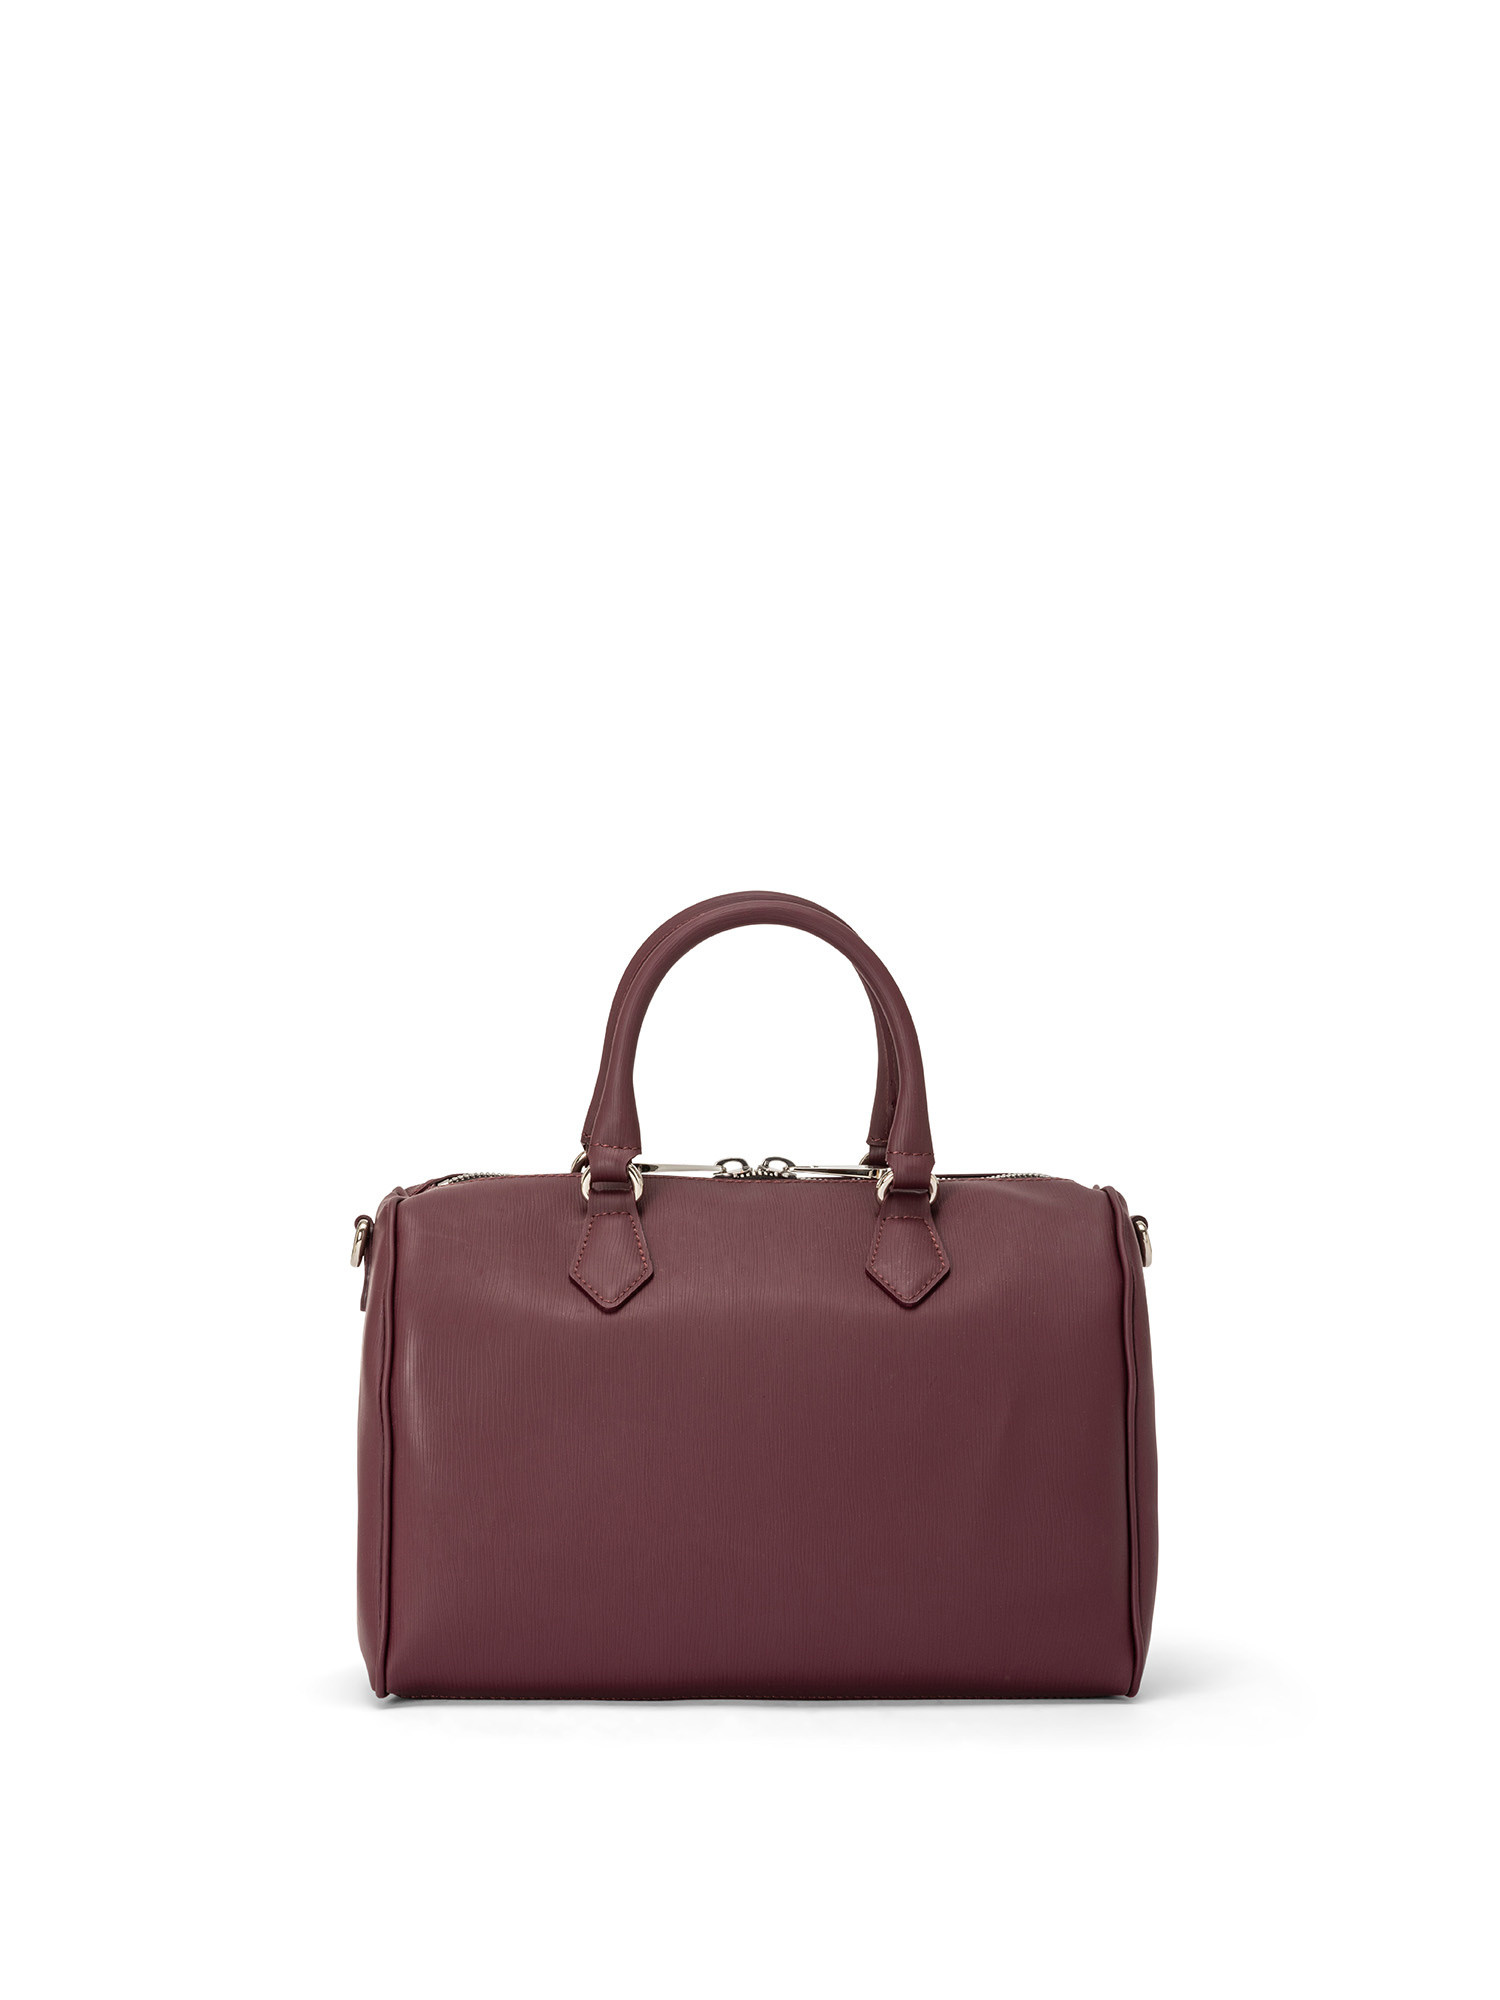 Borsa Sport a tracolla media, Rosso bordeaux, large image number 0